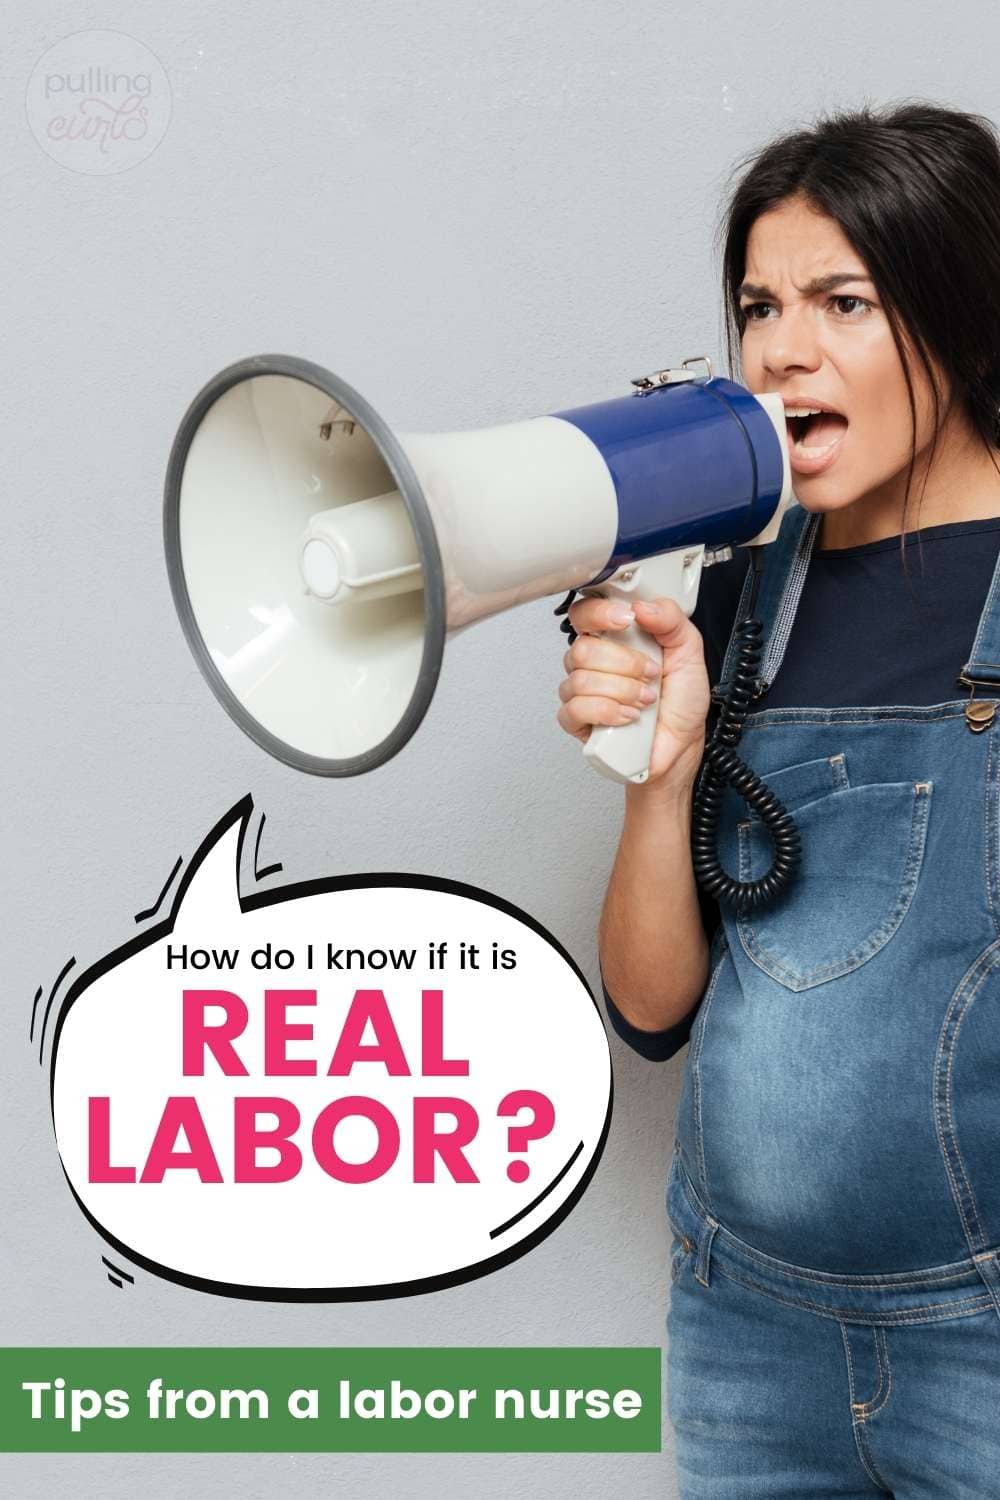 true labor vs false labor / the contractions, signs and pregnancy that you need to understand! via @pullingcurls